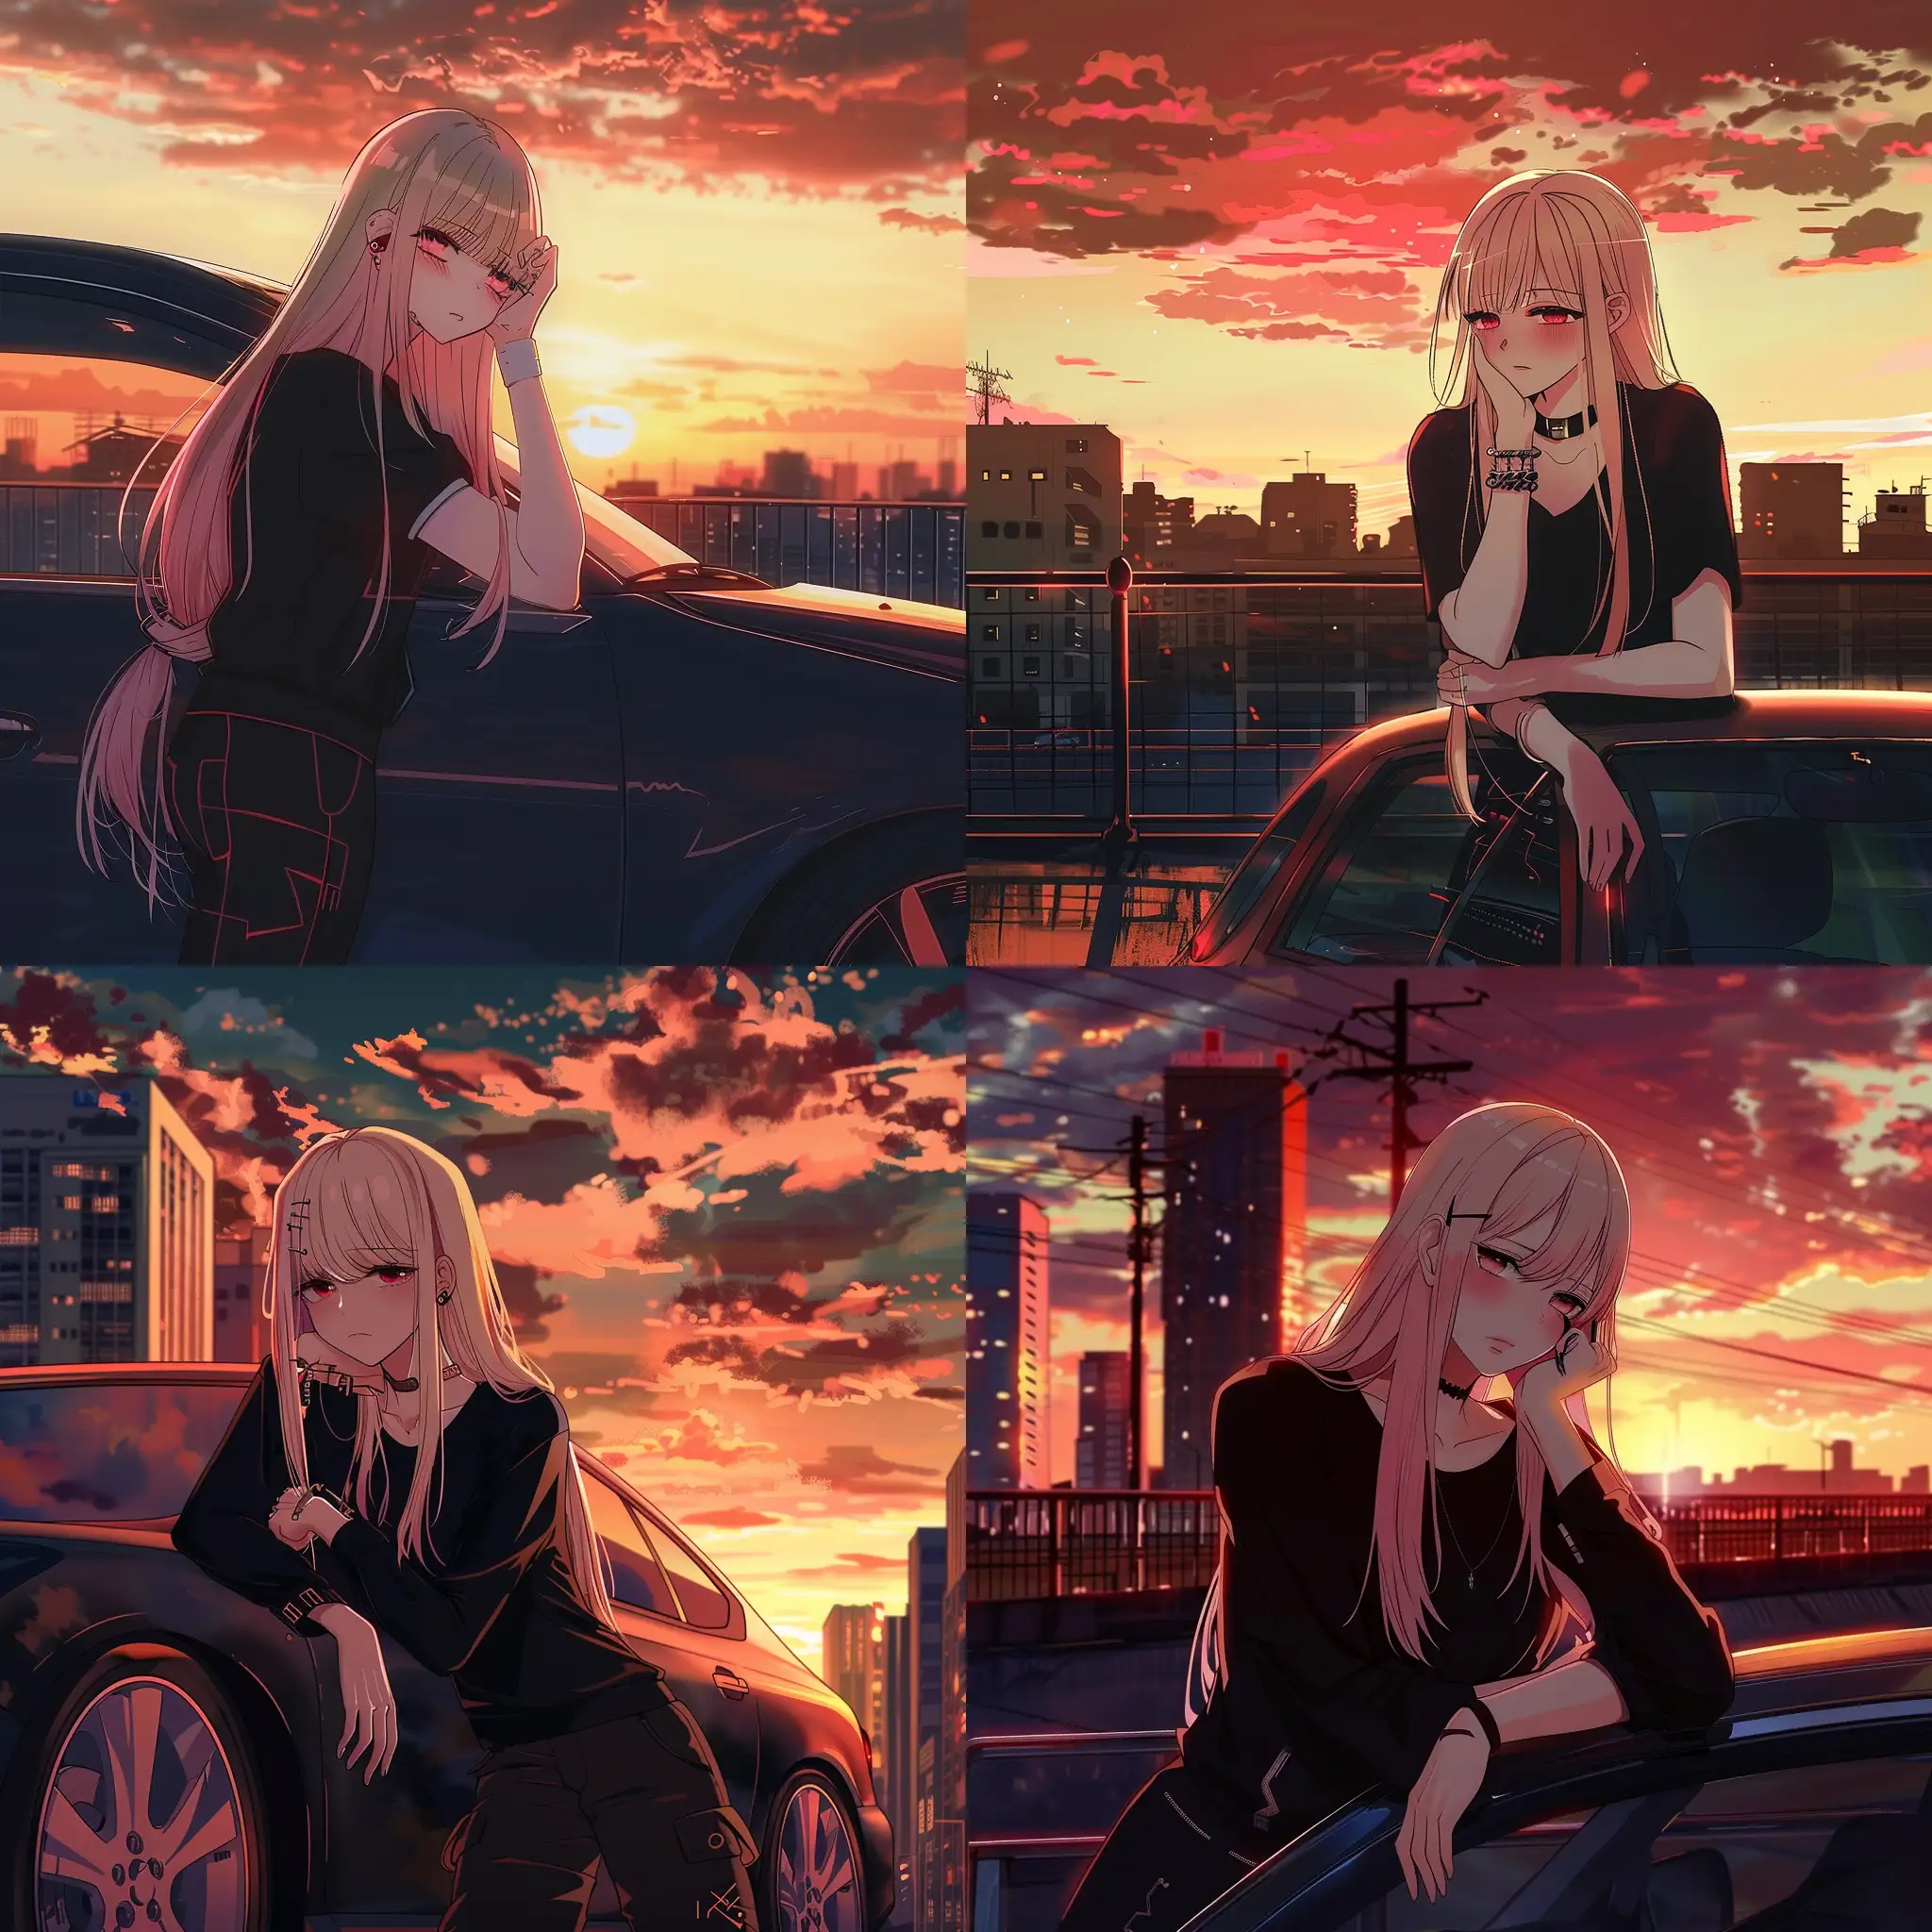 Cyberpunk-Anime-Character-Leaning-on-Car-at-Sunset